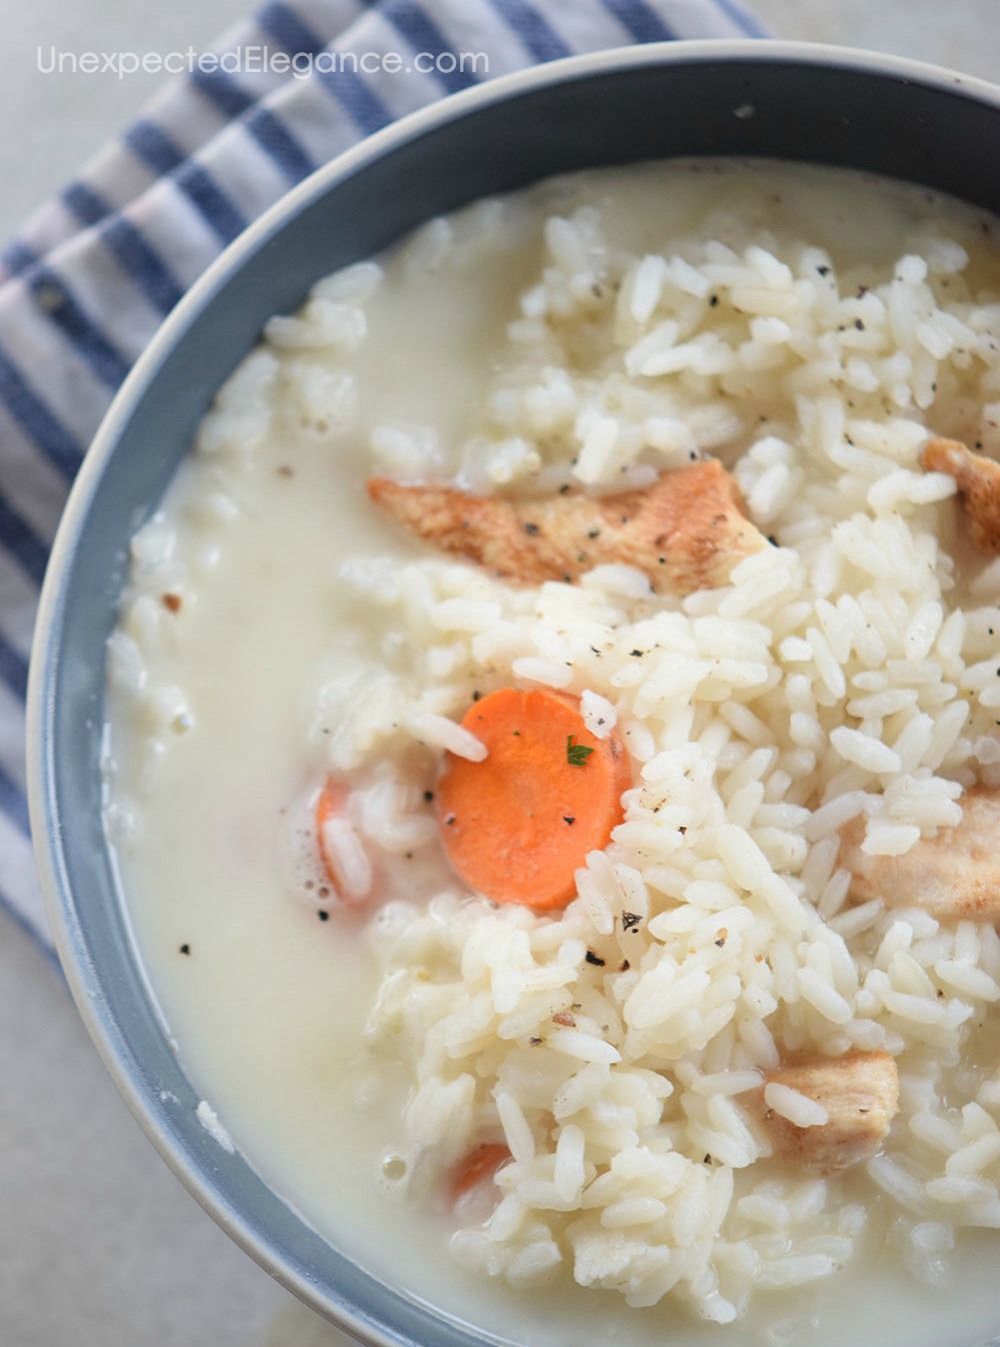 YUMMY! Give this rice and chicken soup a try. It's creamy and delicious!